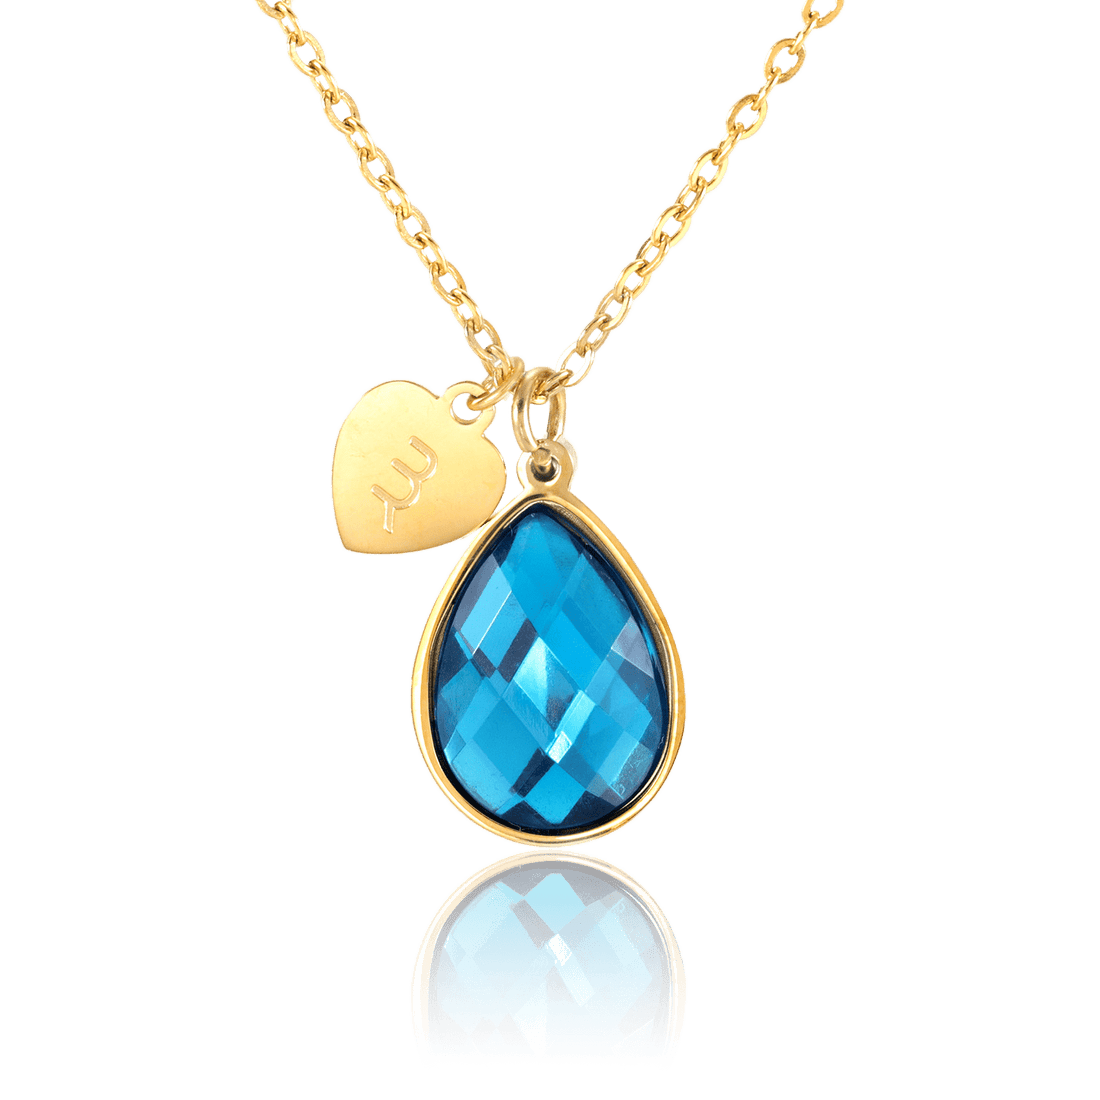 bianco rosso Necklaces Gold March Birthstone - Aquamarine cyprus greece jewelry gift free shipping europe worldwide